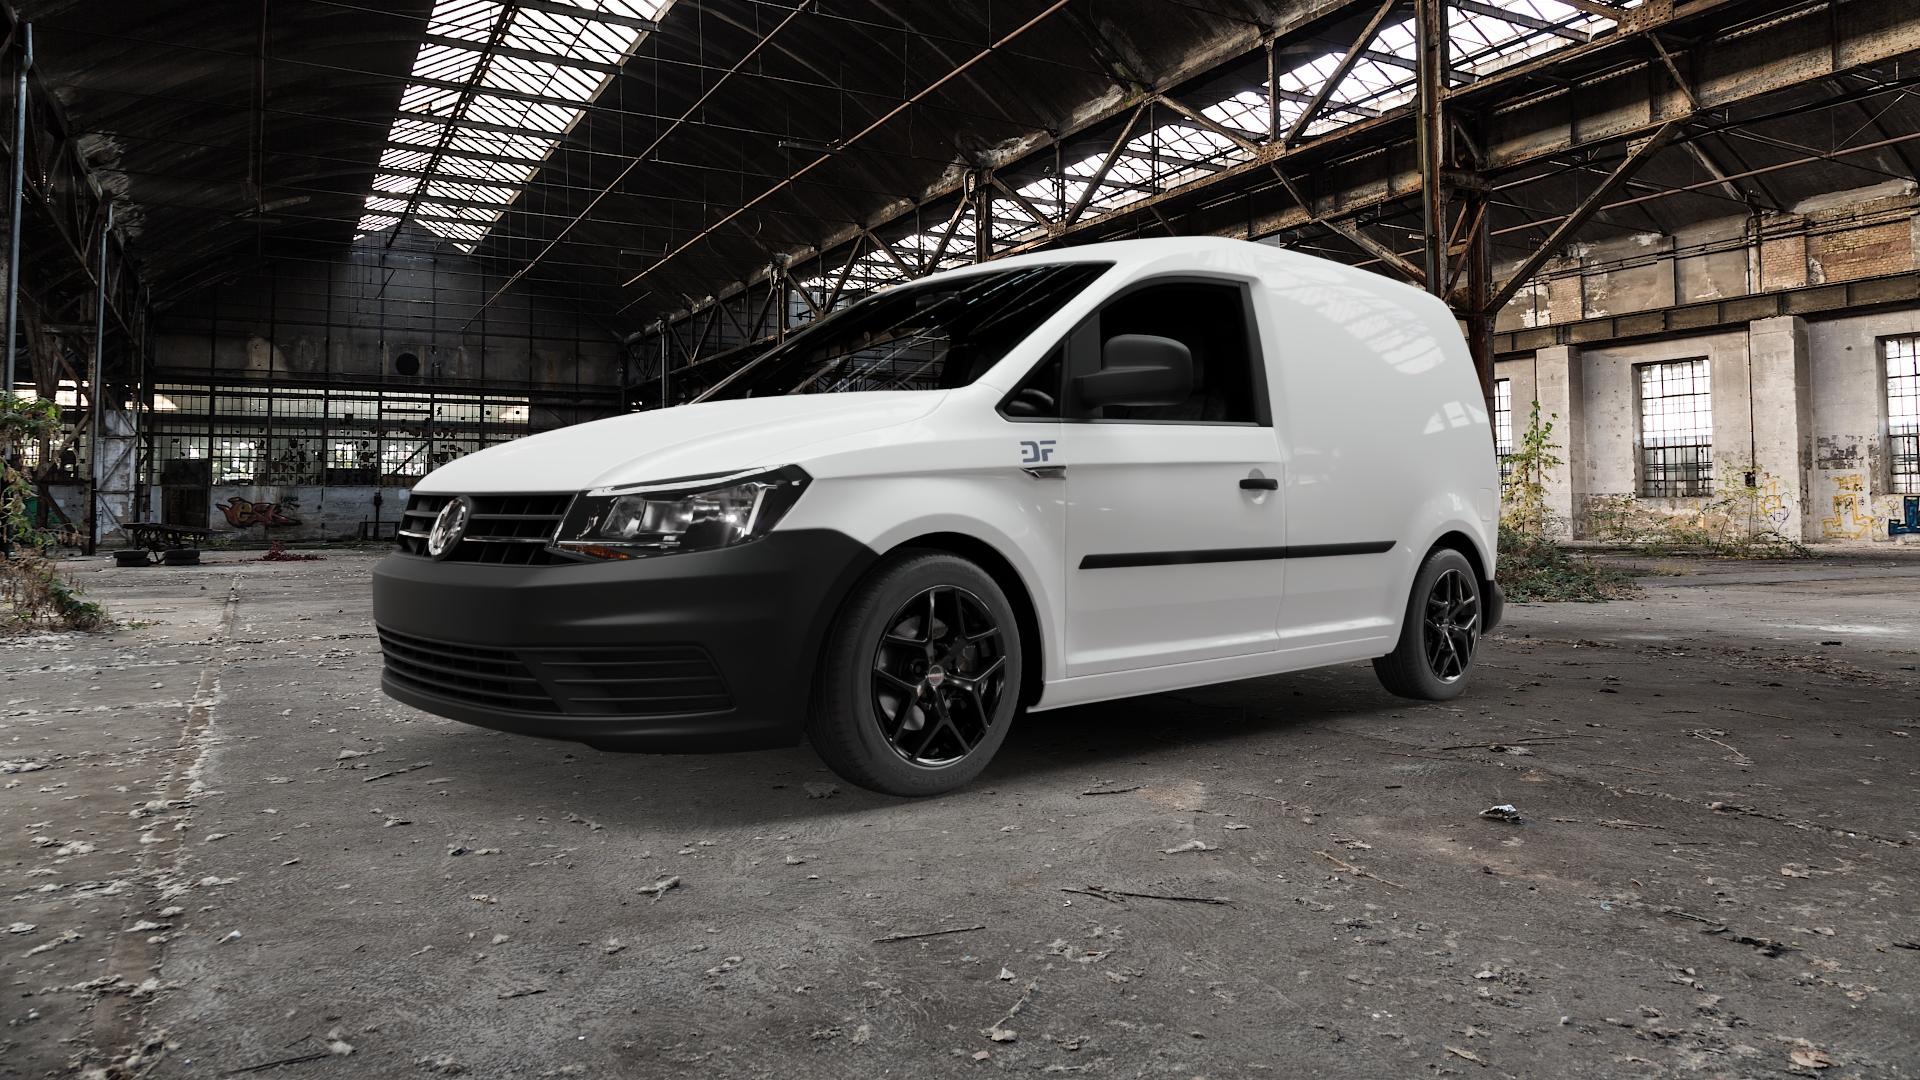 Volkswagen (VW) Caddy 4 2,0l TDI 55kW (75 hp) Wheels and Tyre Packages |  velonity.com